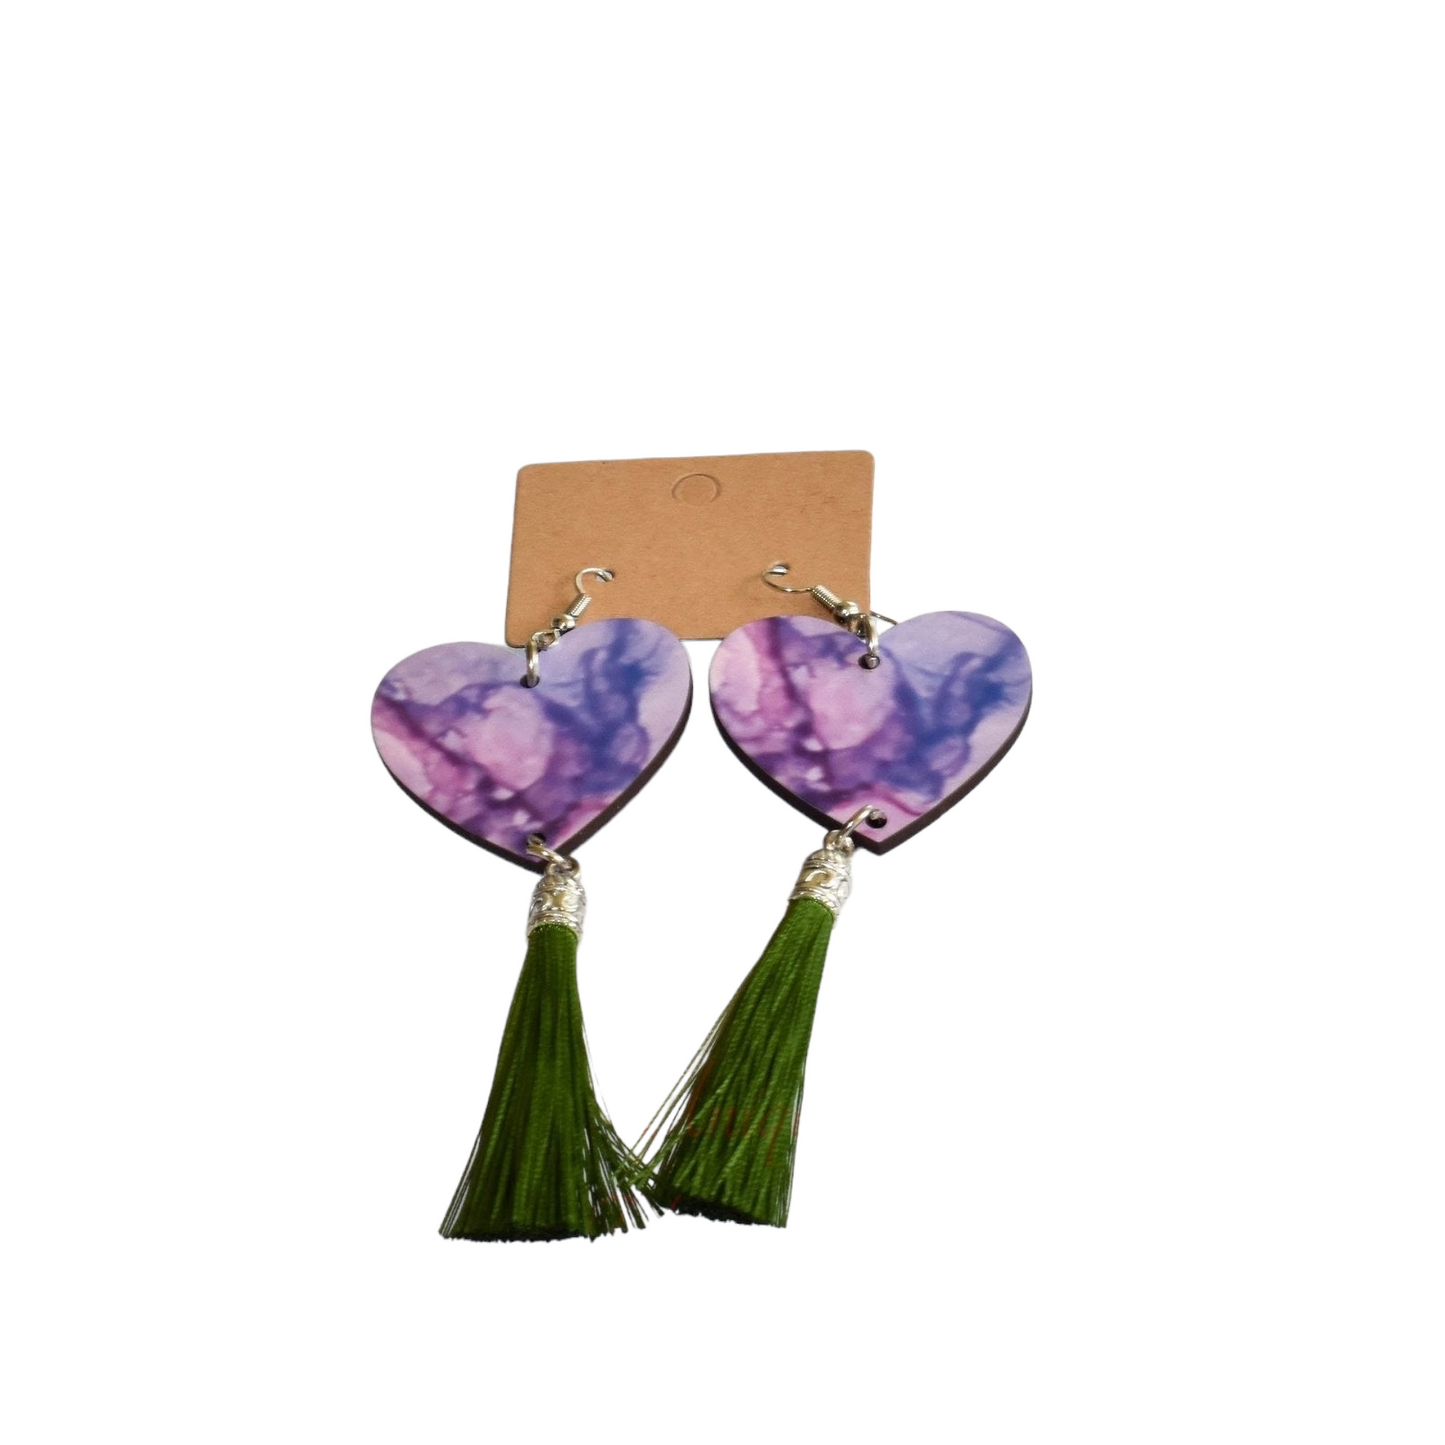 Alcohol Ink Designed Earrings with Tassels